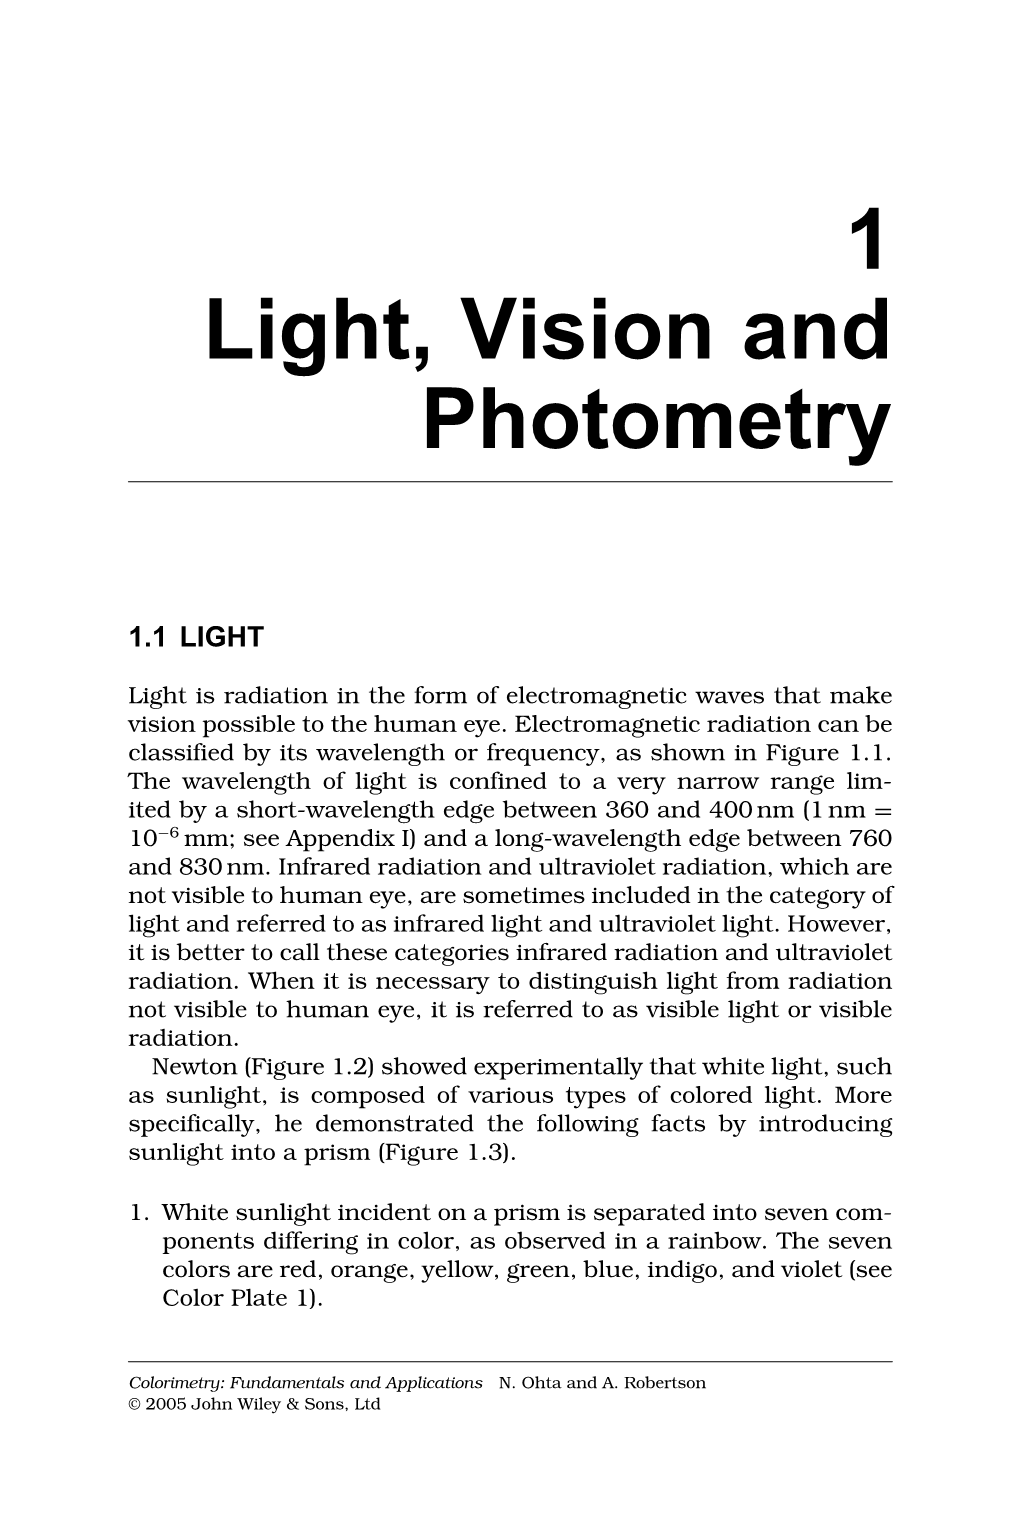 1 Light, Vision and Photometry